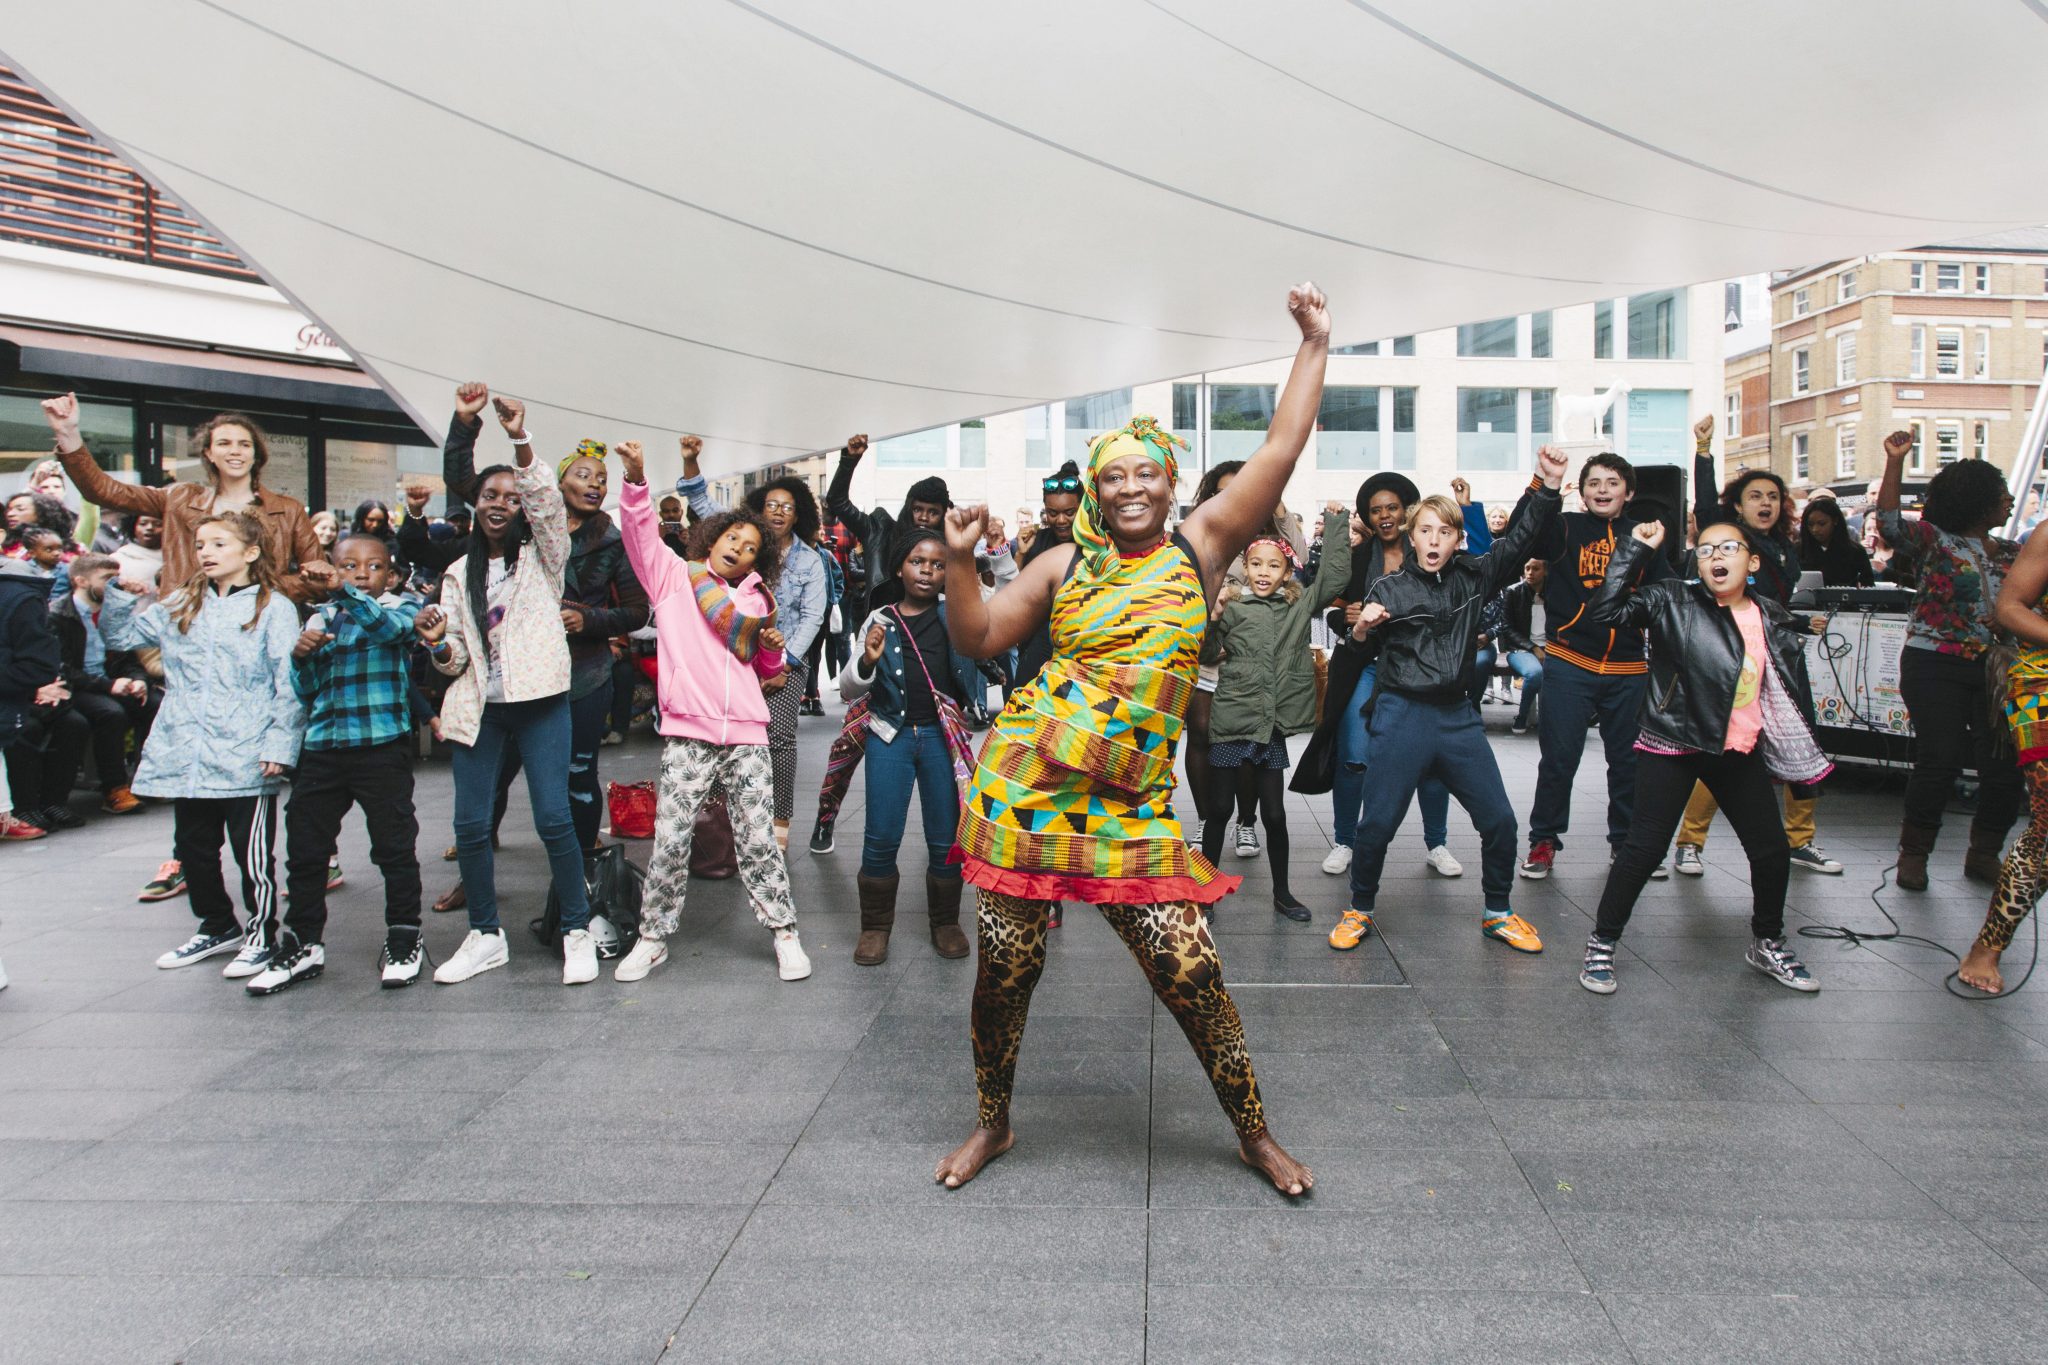 Shop, taste, experience: Africa at Spitalfields is 5 this May